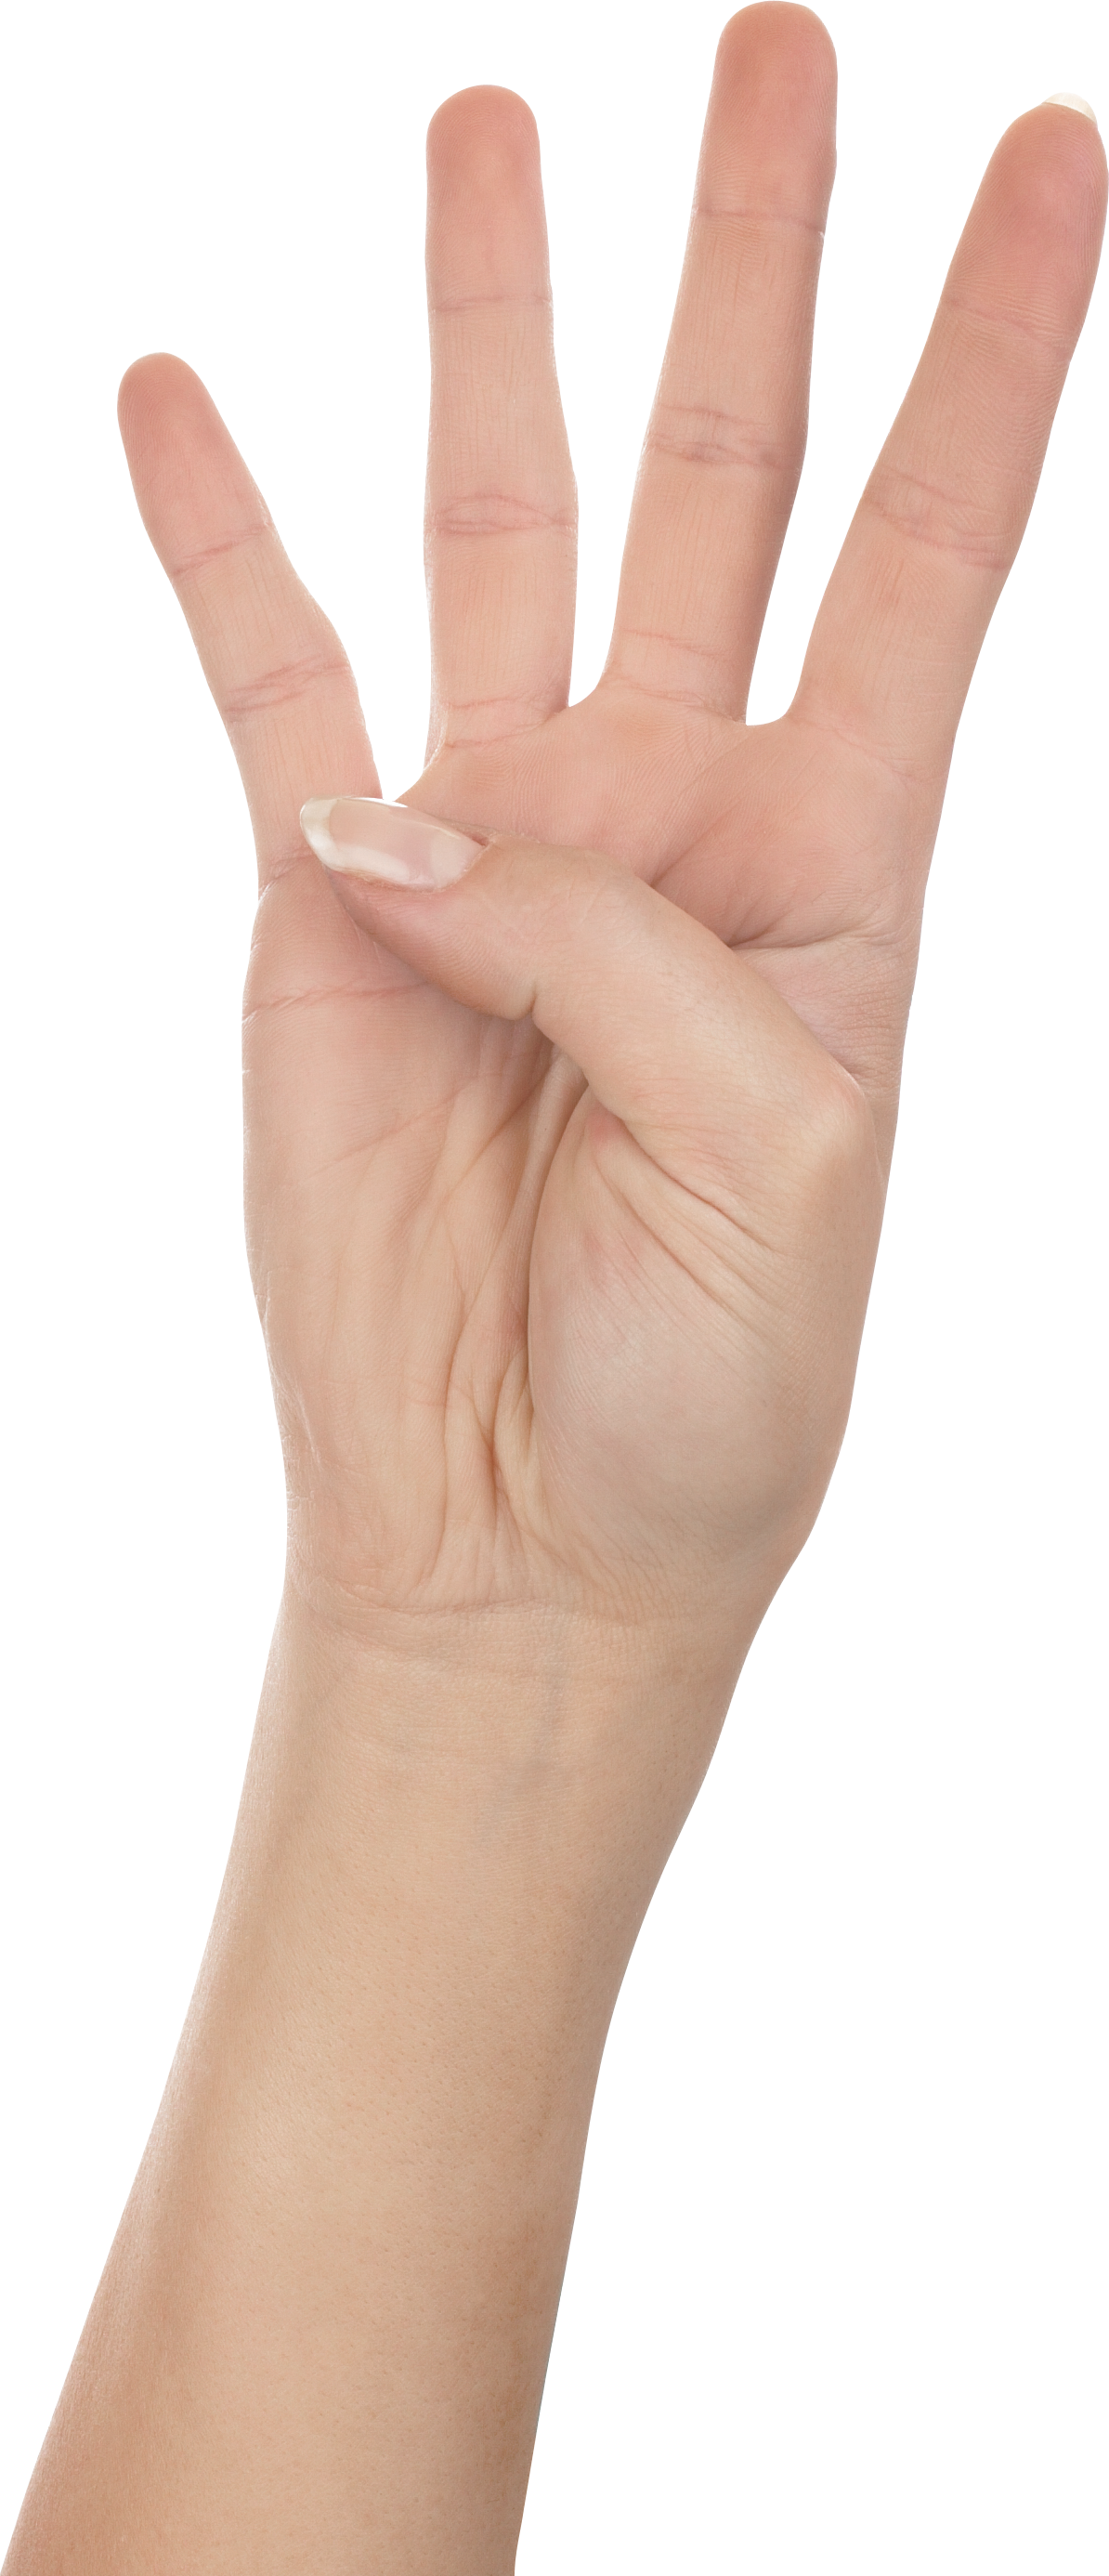 four fingers PNG image